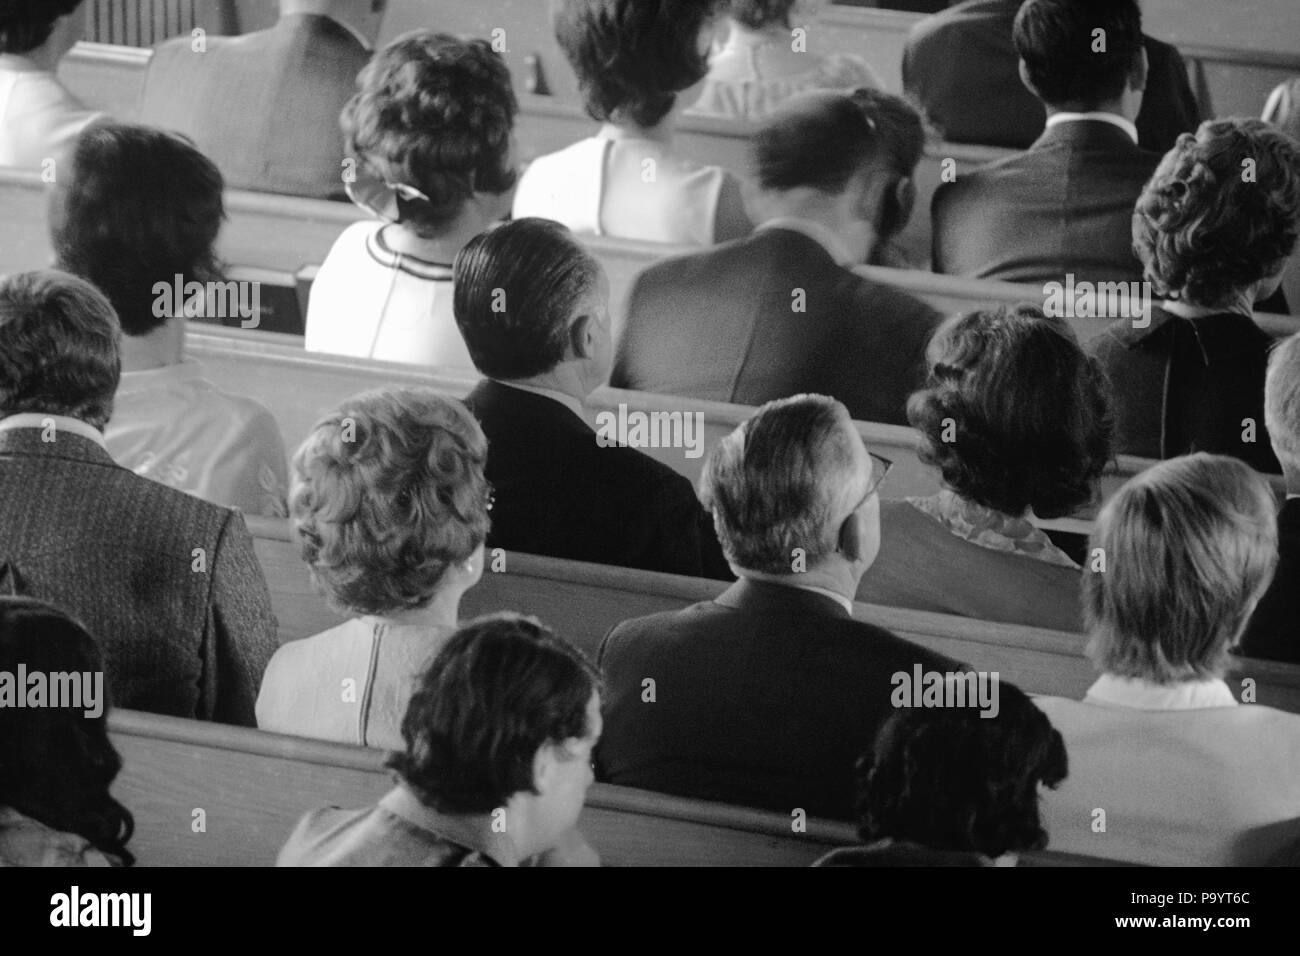 1980s ADULT MEN AND WOMEN PEOPLE SITTING IN CHURCH PEWS - c11836 JAC002 HARS INSPIRATION SIT MALES CHRISTIAN SPIRITUALITY B&W FREEDOM CONGREGATION HAPPINESS HEAD AND SHOULDERS HIGH ANGLE RELIGIOUS STRENGTH AND ATTENTION CHOICE CHRISTIANITY POWERFUL REAR VIEW IN AUTHORITY CONNECTION BELIEVER PEWS FAITHFUL BACK VIEW PEW REARVIEW TOGETHERNESS ATTENTIVE BLACK AND WHITE CAUCASIAN ETHNICITY OLD FASHIONED PROTESTANT Stock Photo